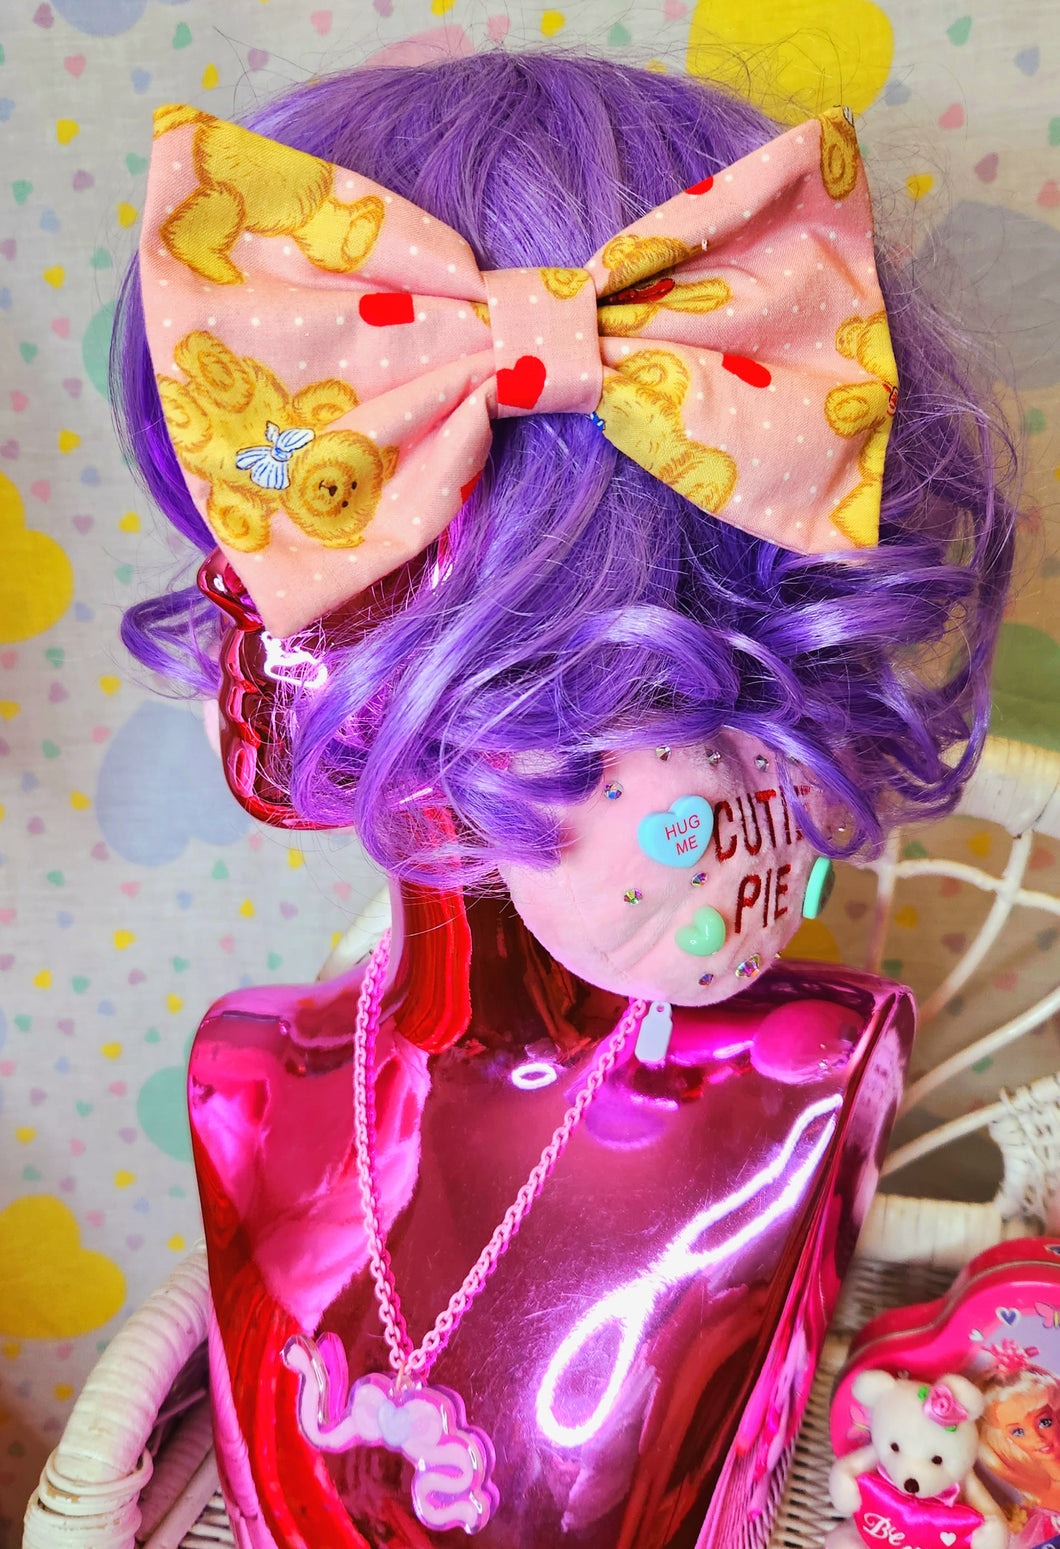 Pink Valentine's Day hair bow with hearts and teddy bears, on a lavender haired shiny pink mannequin bust